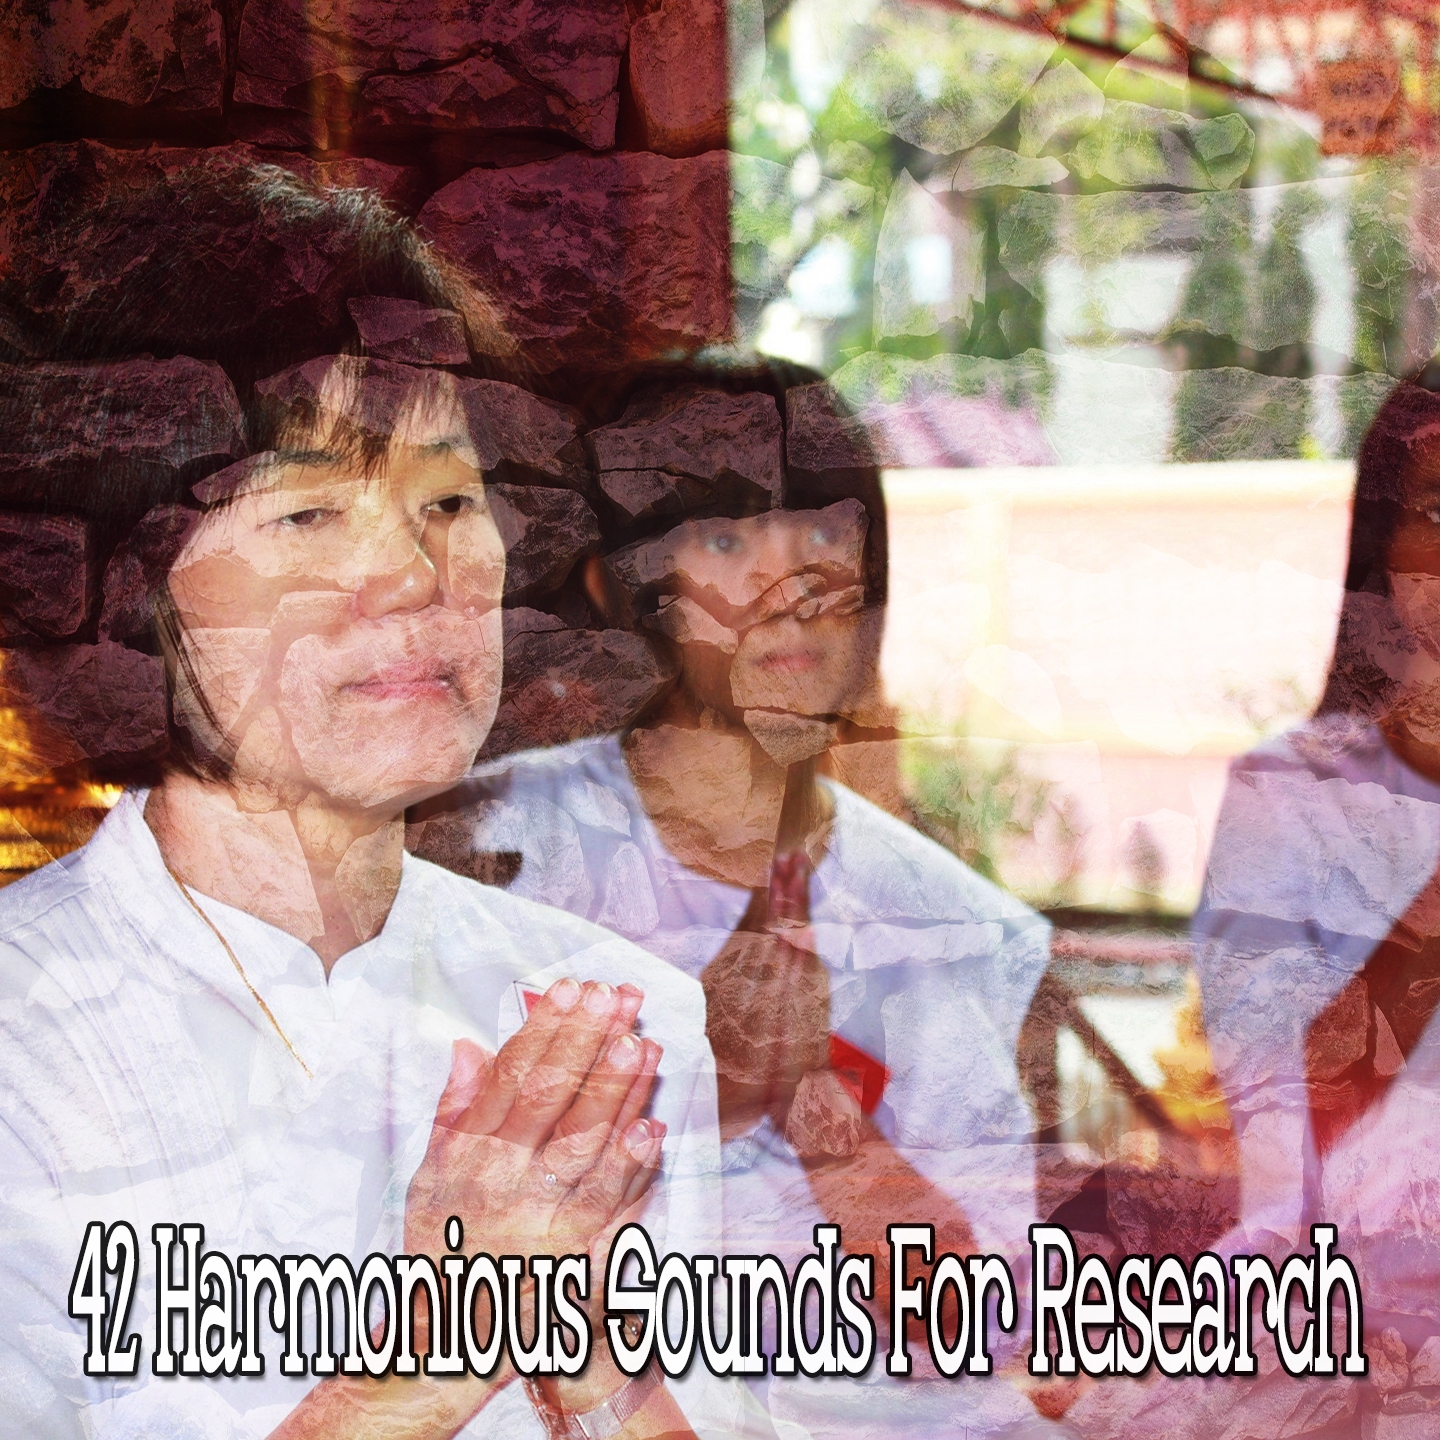 42 Harmonious Sounds For Research